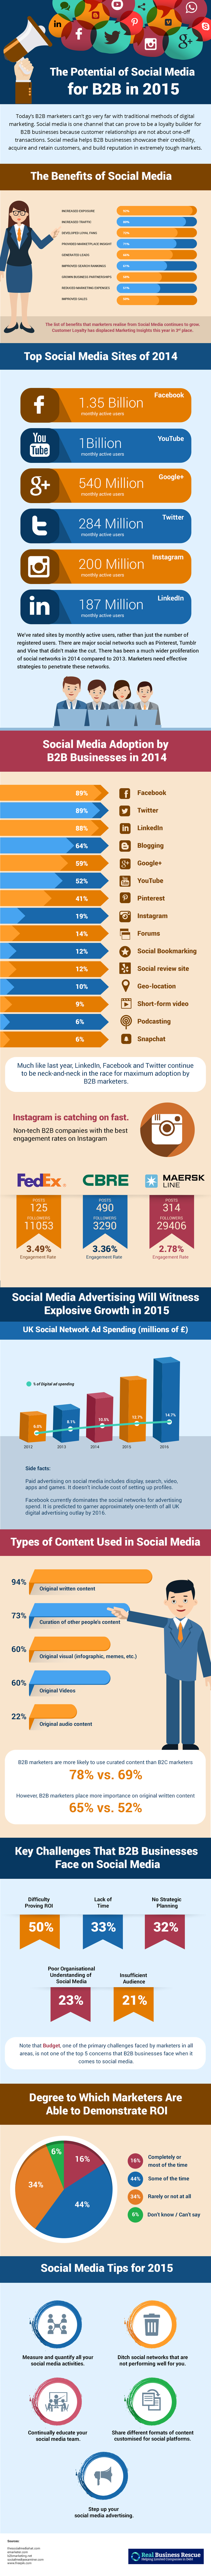 How B2B Businesses Are Tackling Social Media In 2015